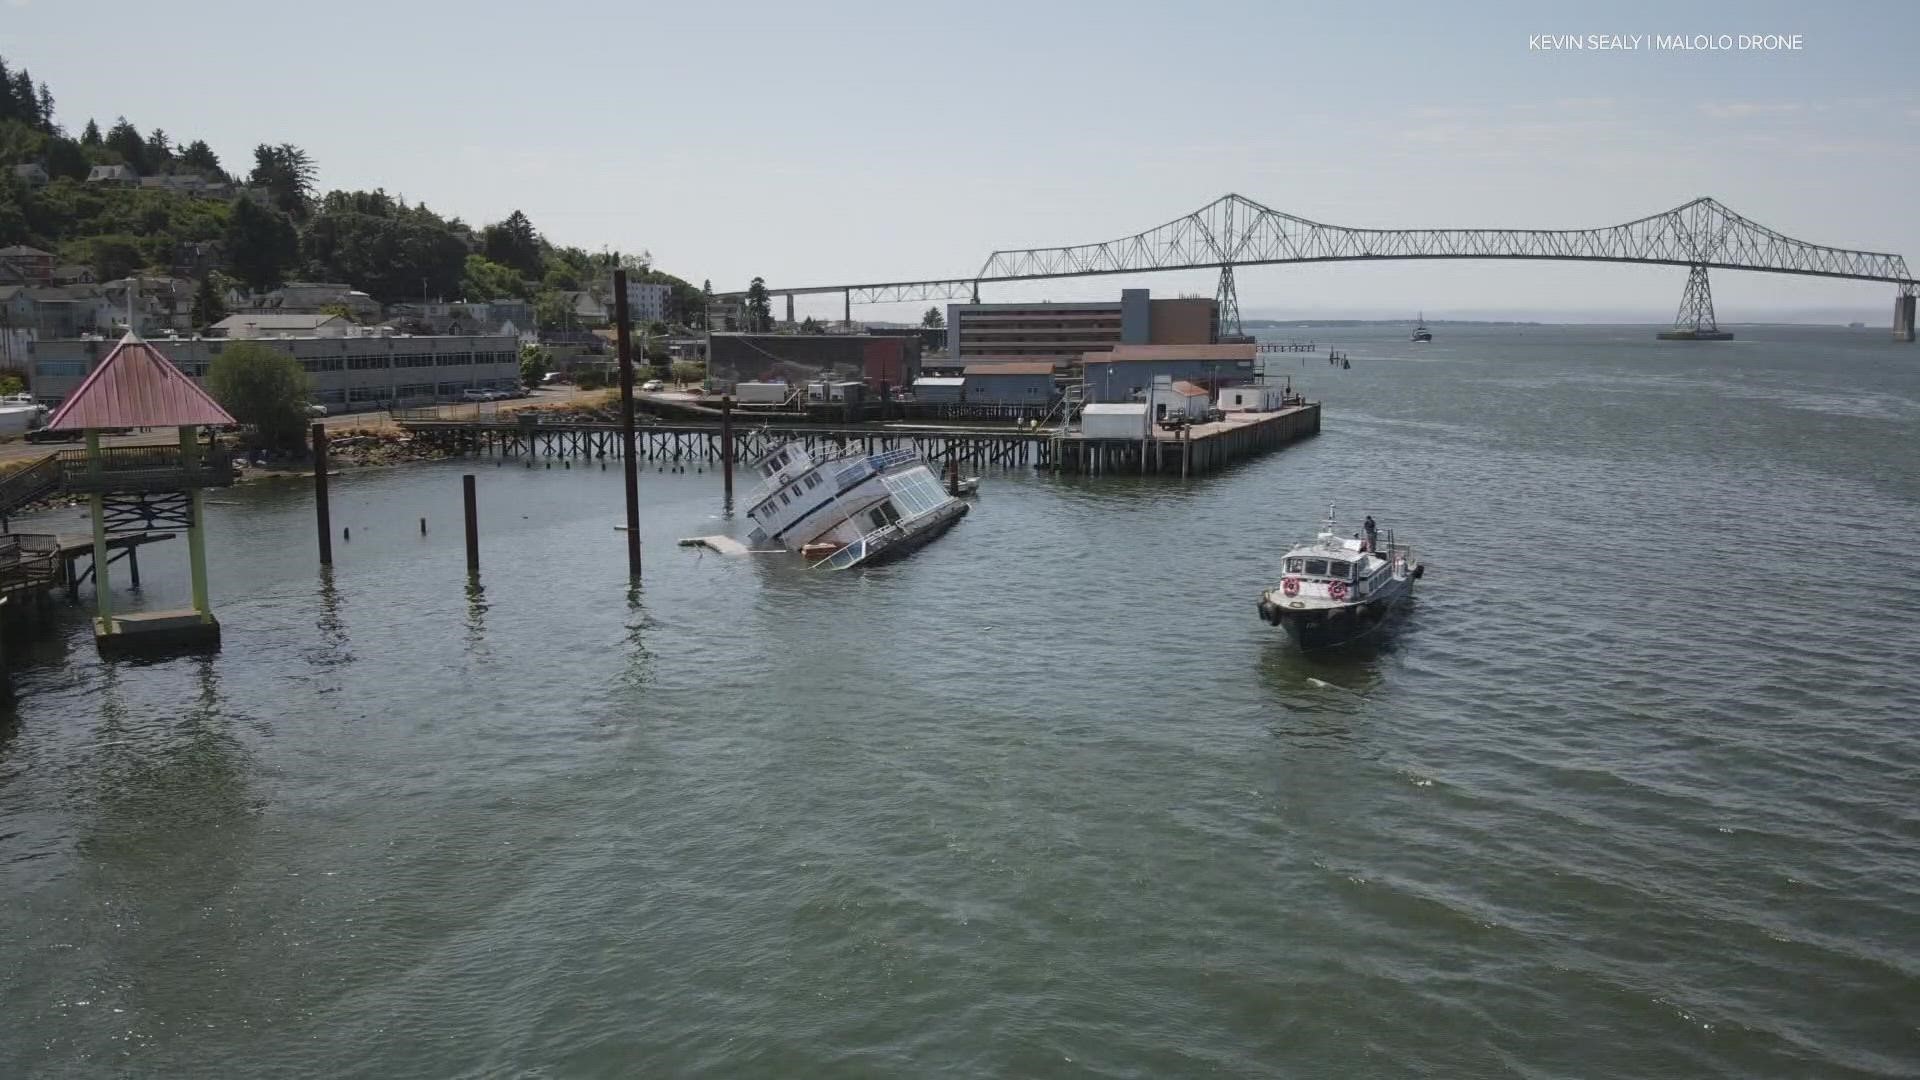 The vessel 'Tourist II' sank in Astoria with no one aboard. A KGW viewer shared drone video of the boat.